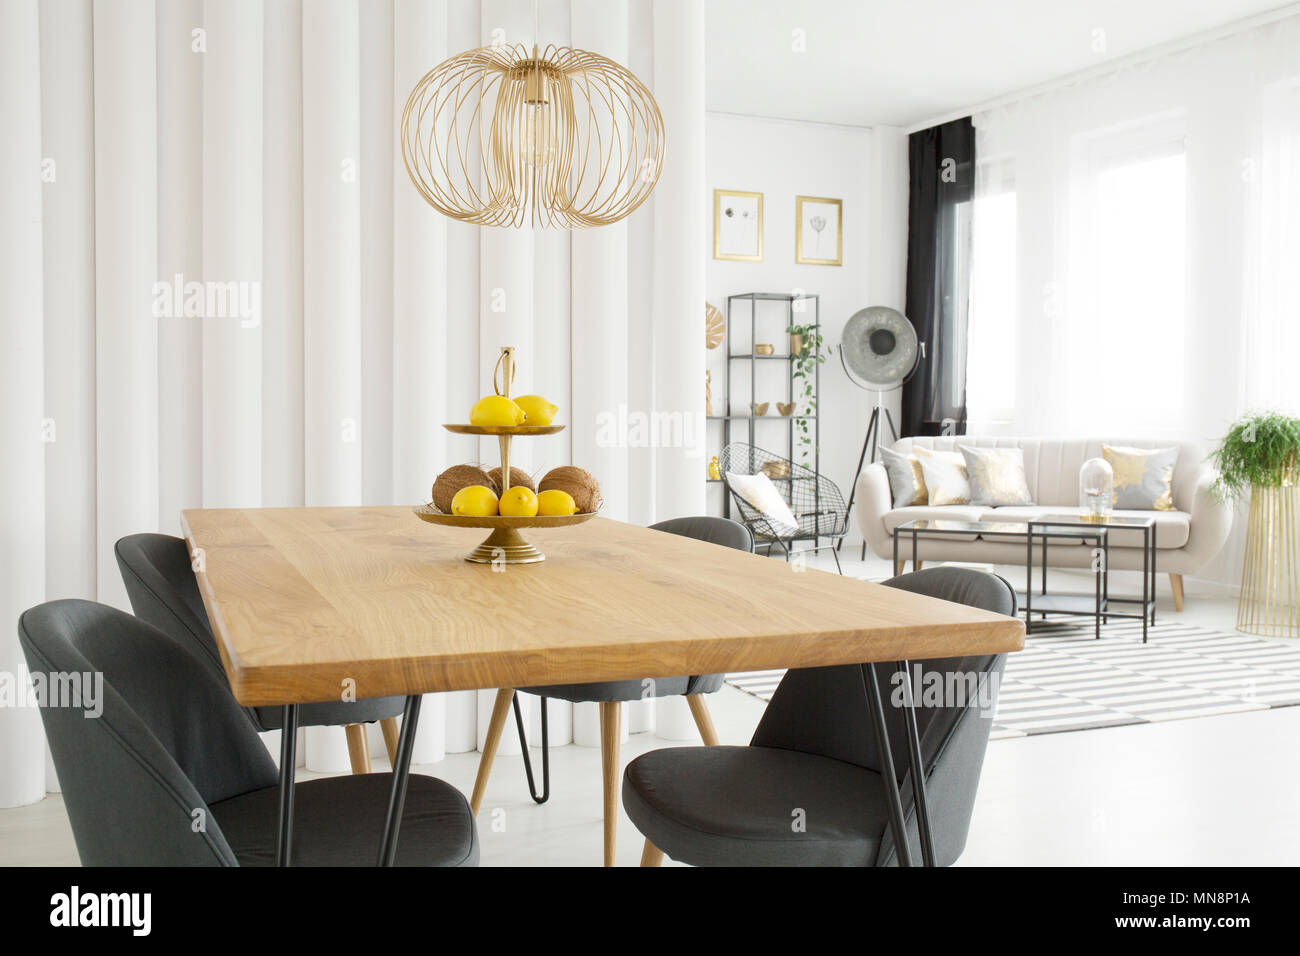 Bright dining room interior with fruit on wooden table, gray chairs and  tubes wall. Living room in the background Stock Photo - Alamy